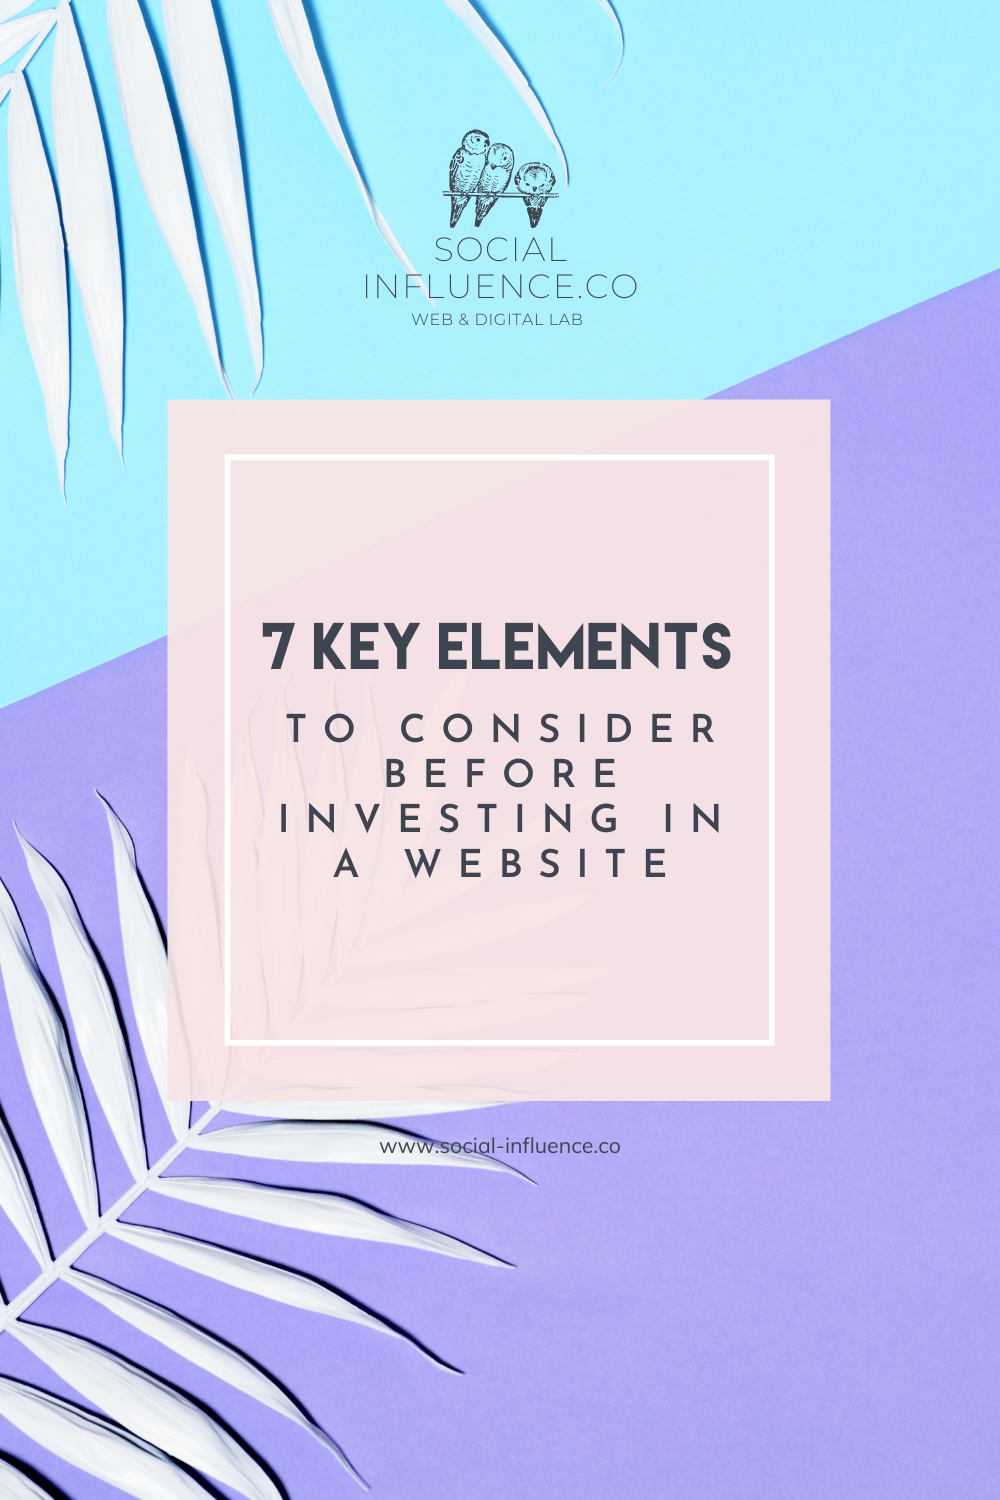 7 Key Elements to Consider Before Investing in a Website